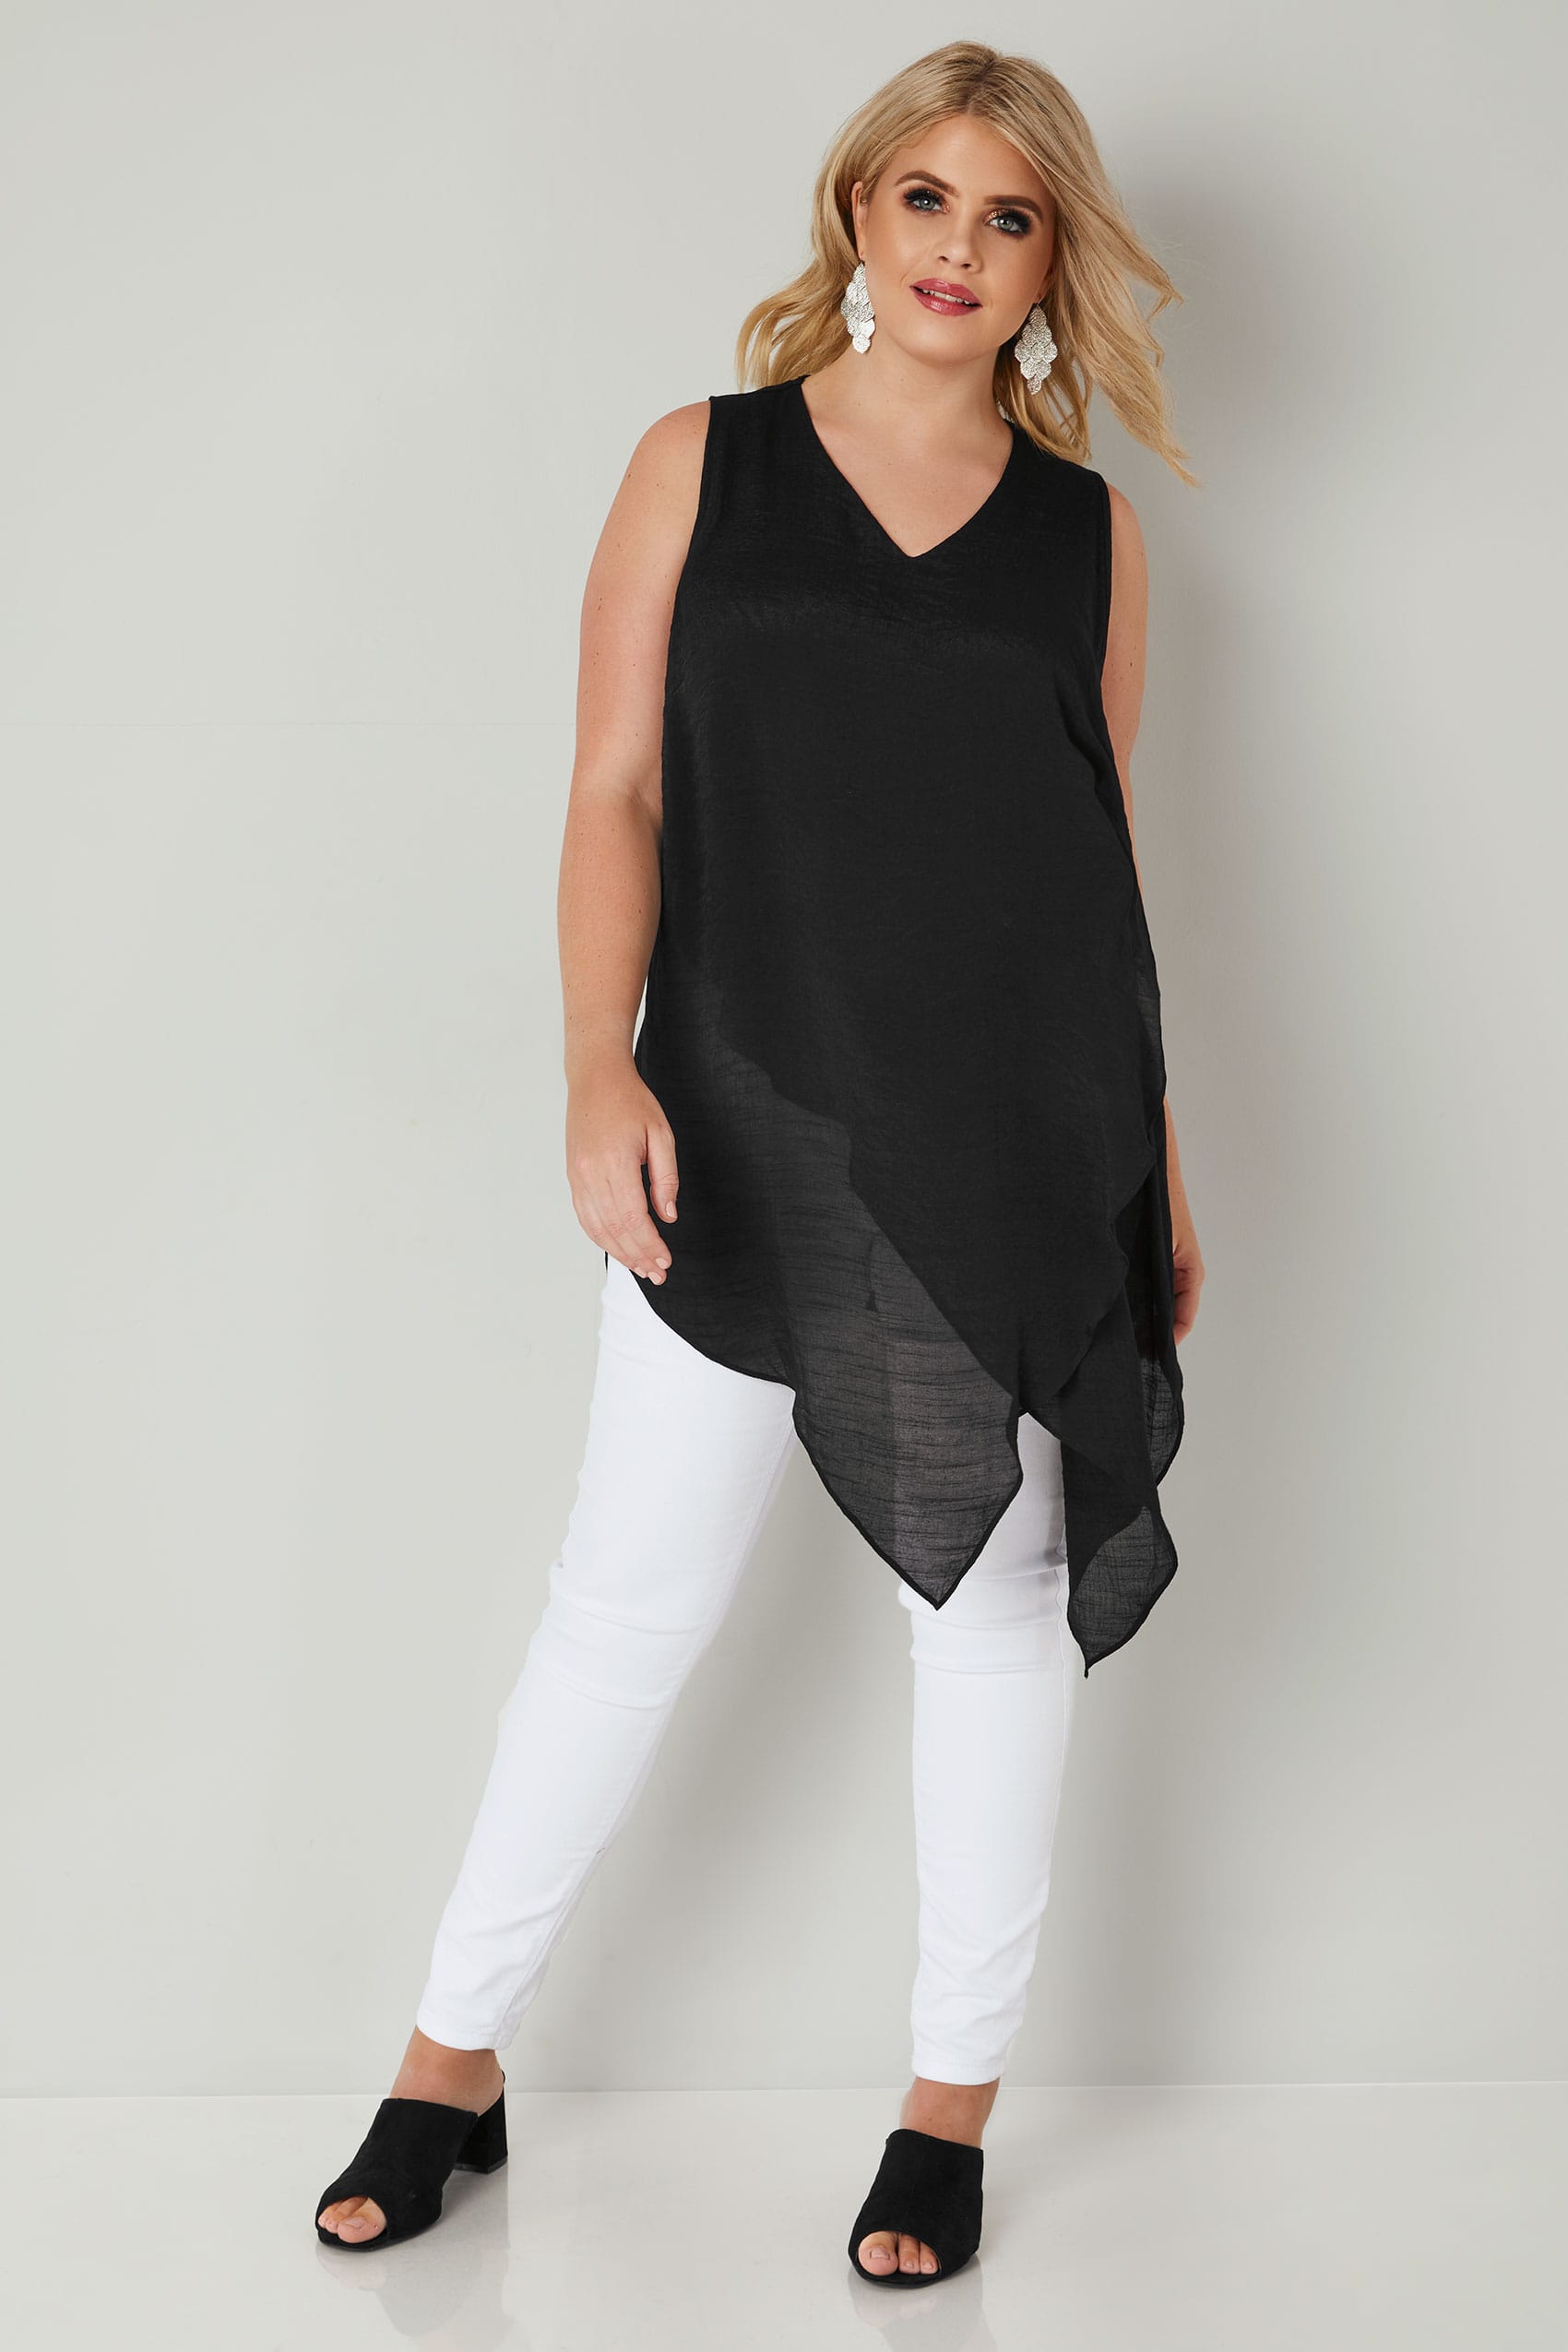 Black Sleeveless Layered Top With Asymmetric Front, Plus size 16 to 36